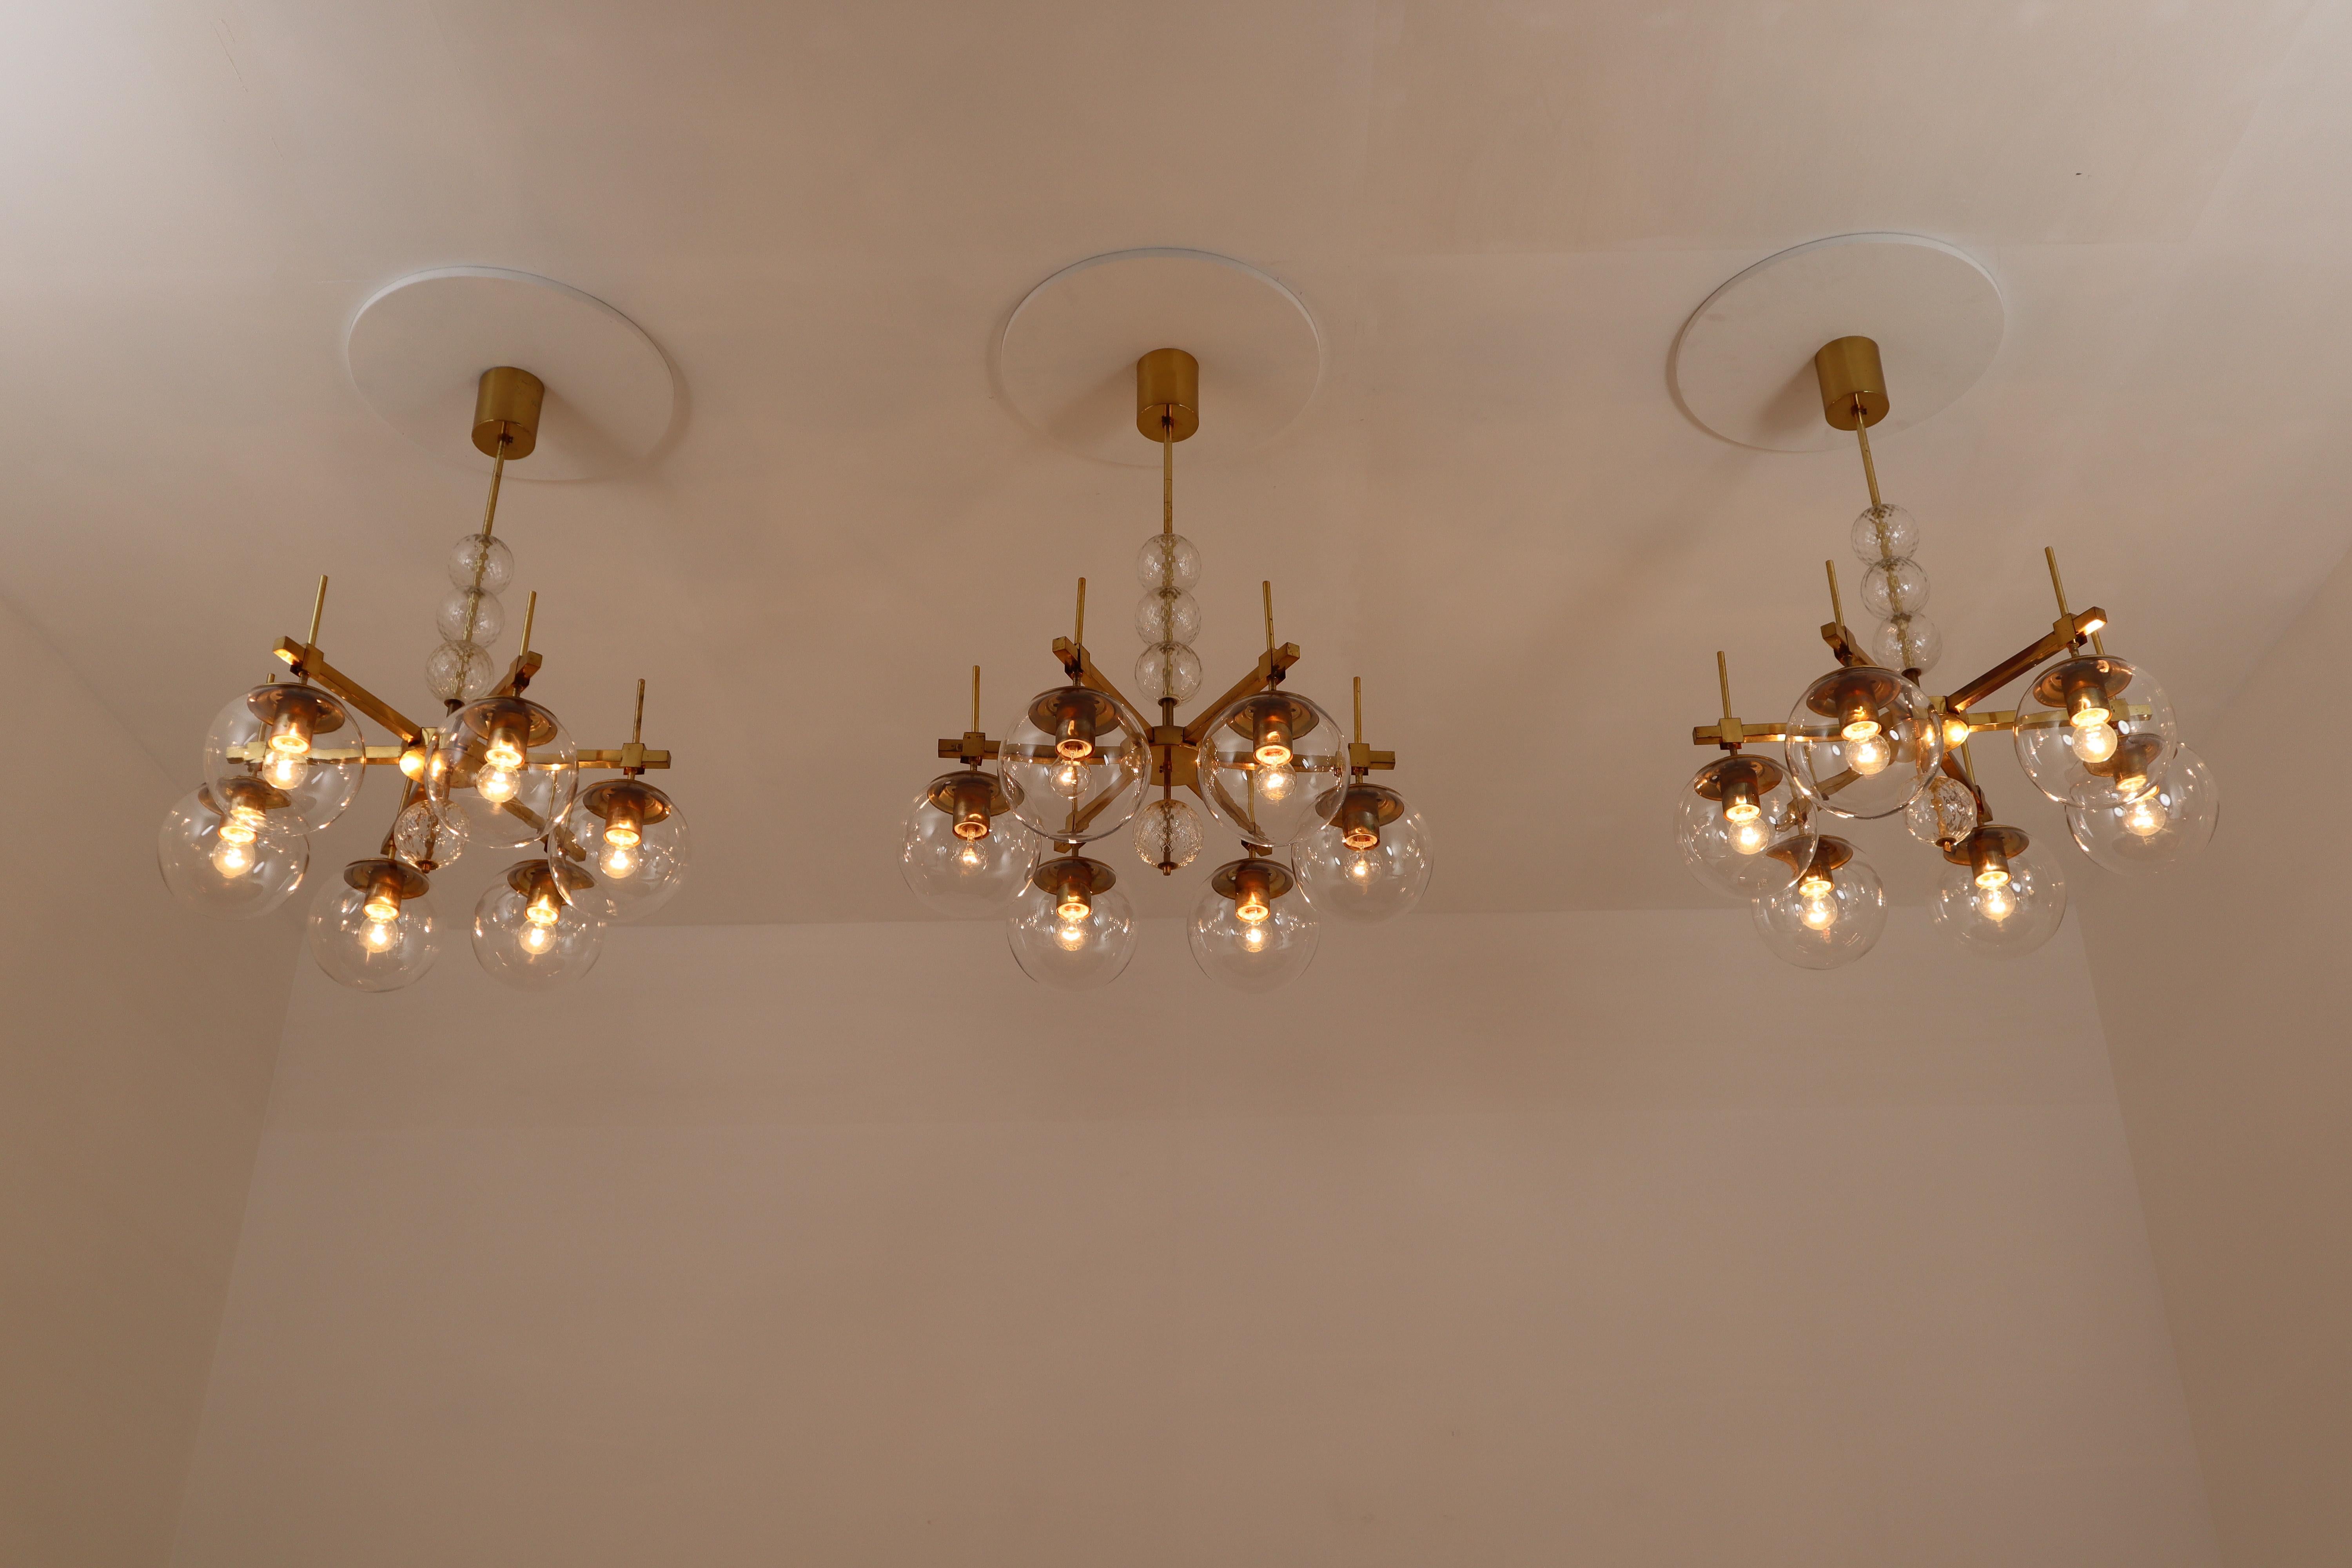 Six Midcentury Chandeliers with Brass Fixture and Hand-Blown Glass, Europe 9